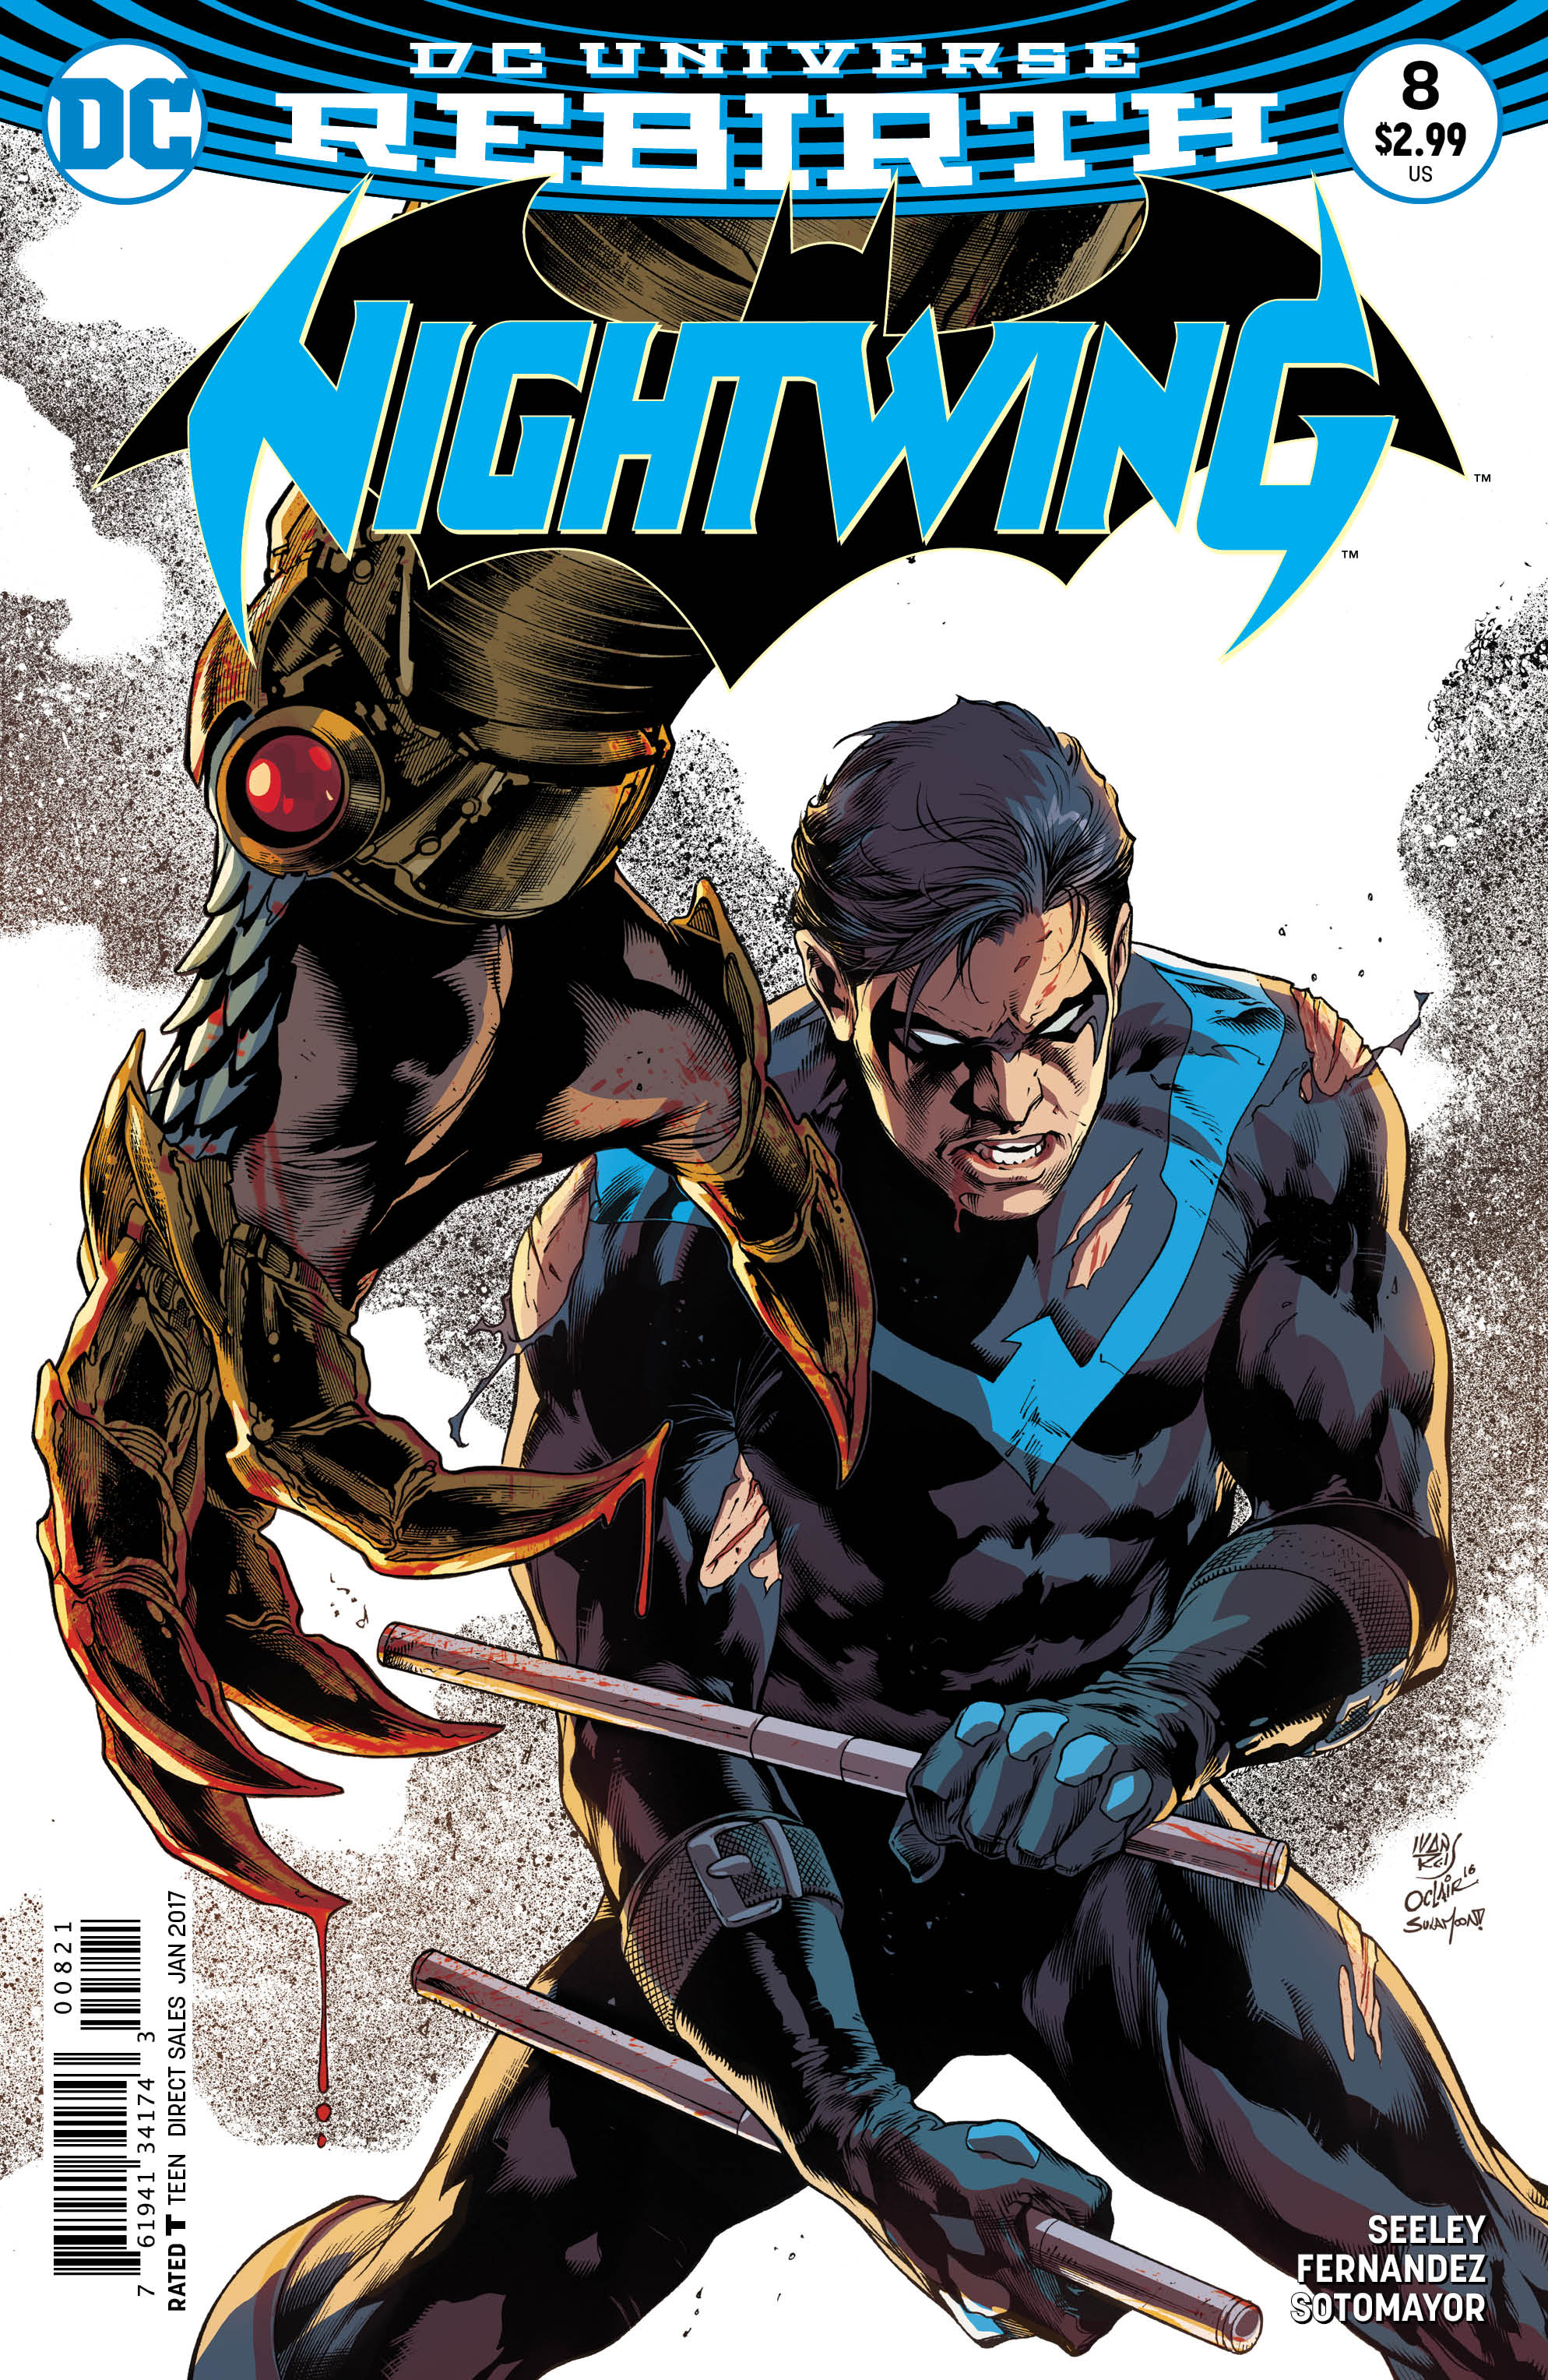 Nightwing #10 Review